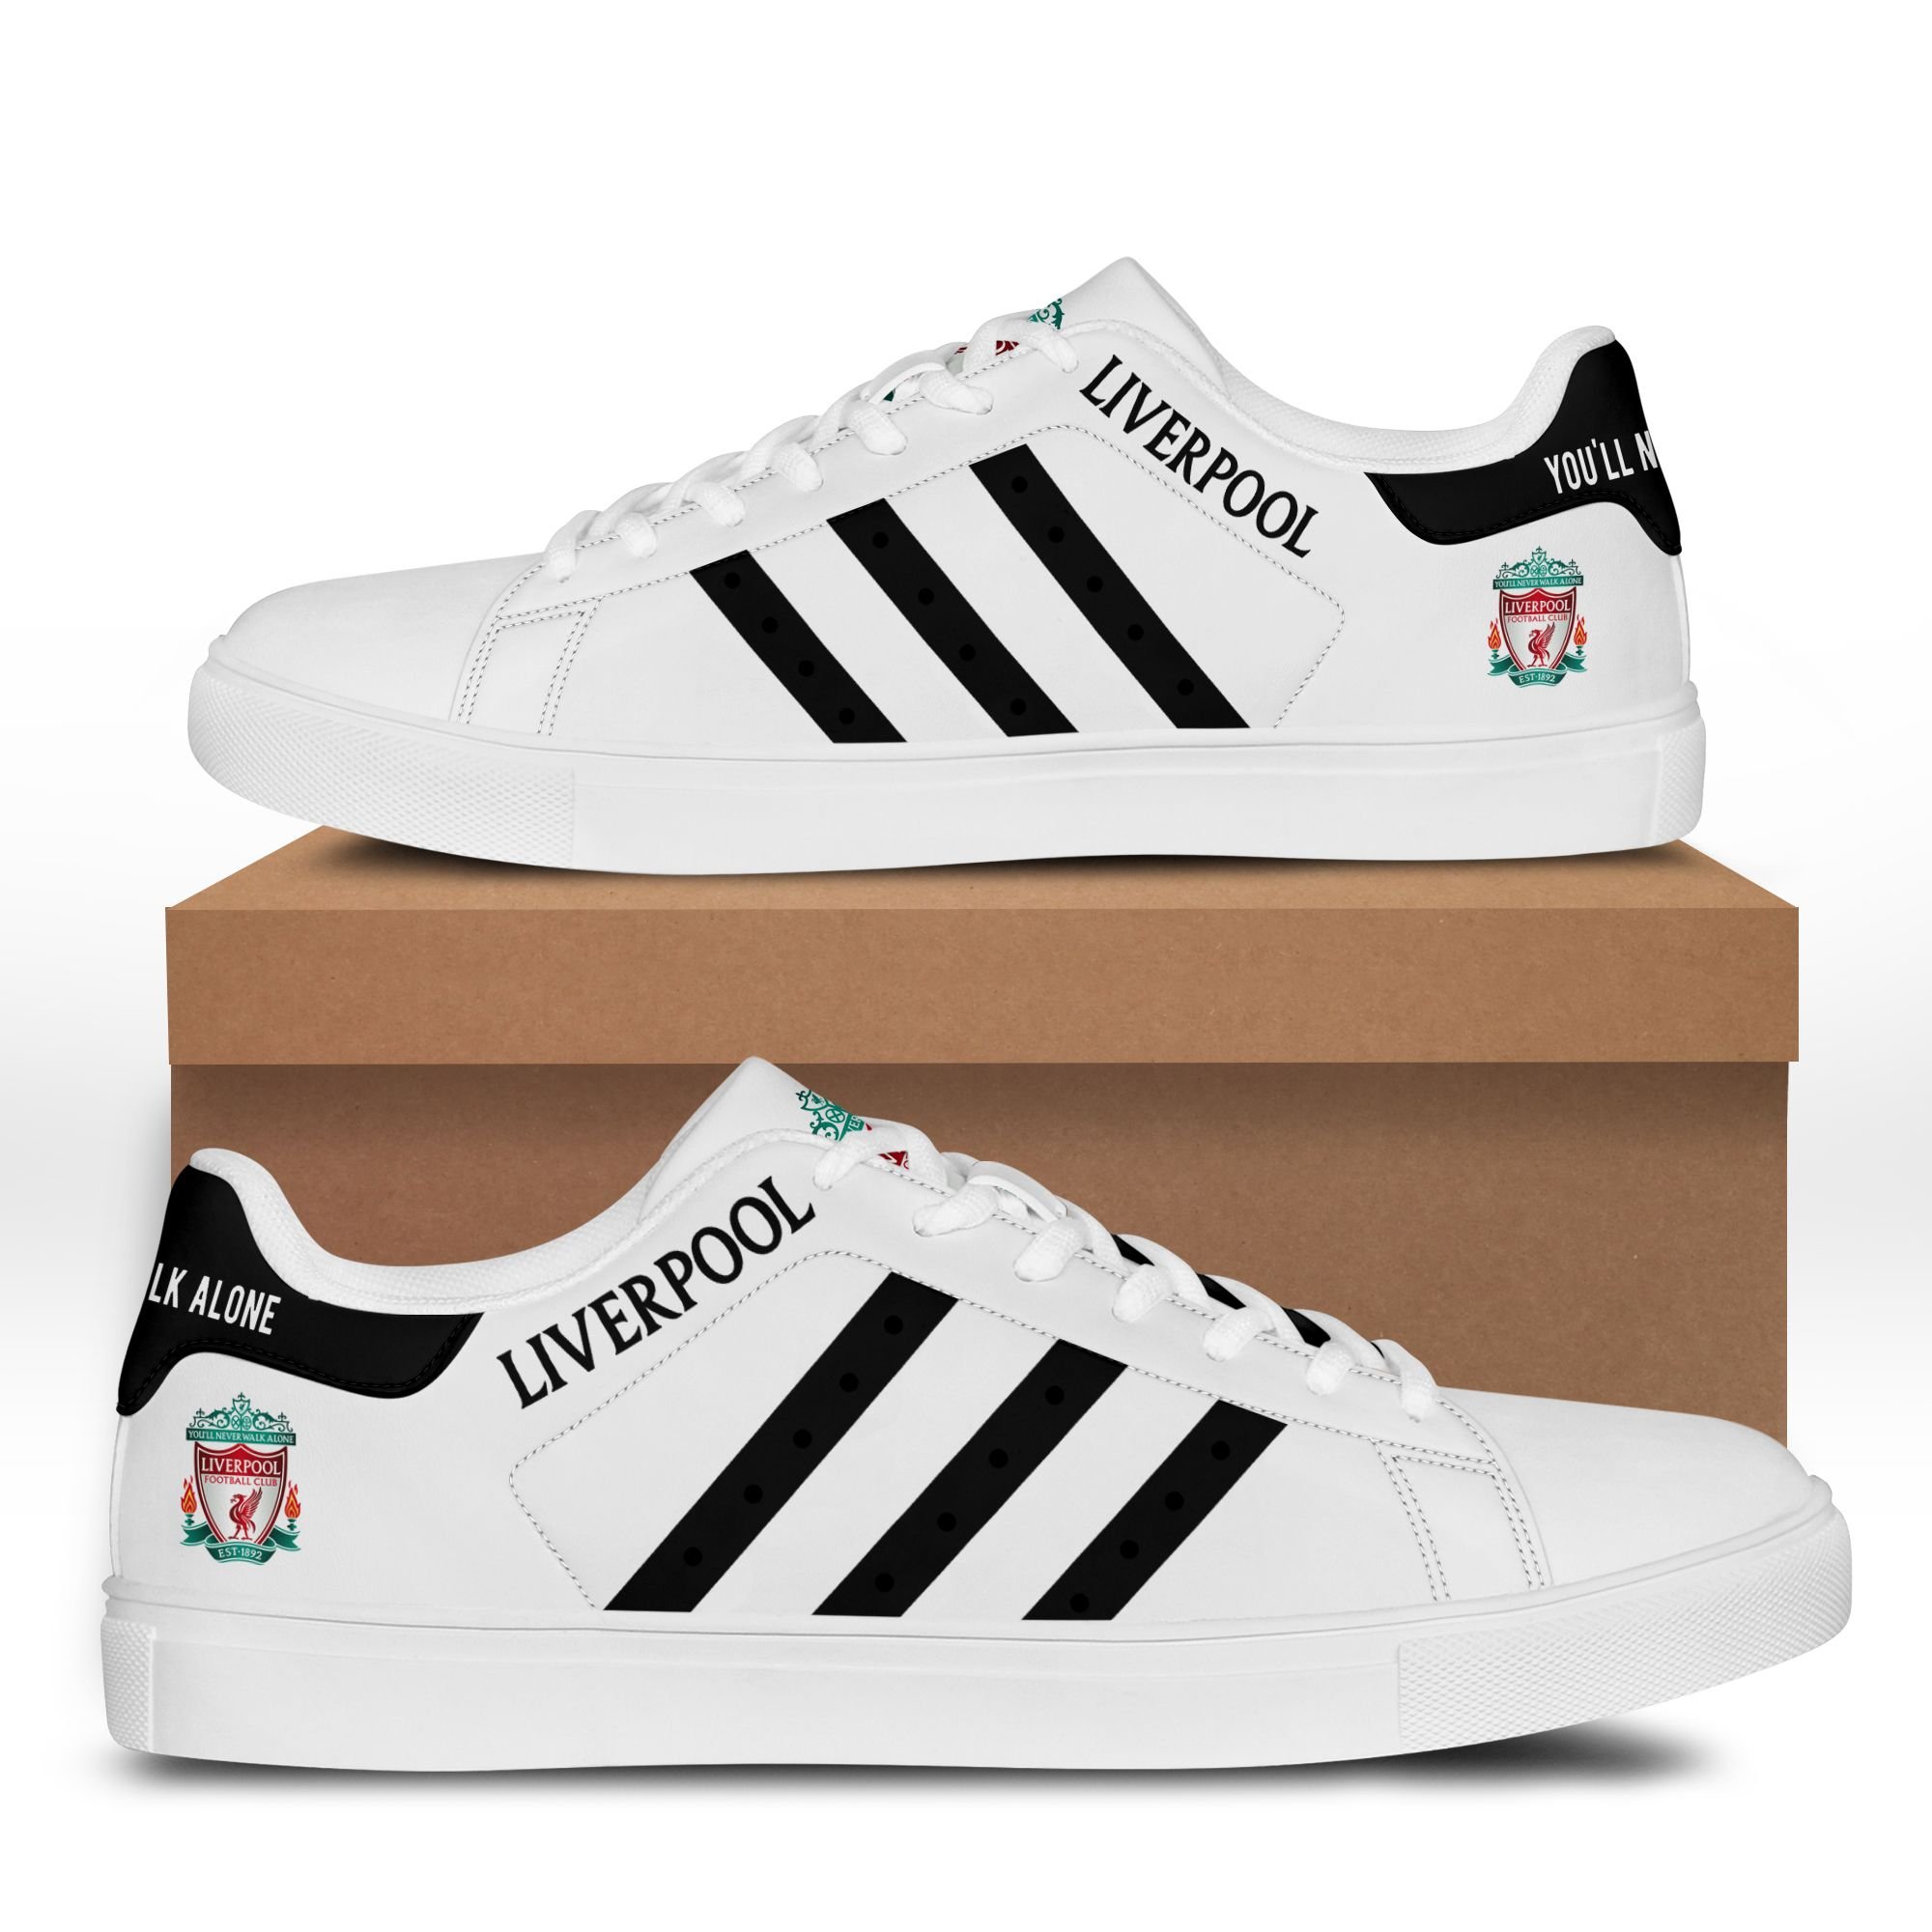 Liverpool stan smith shoes - Picture 2